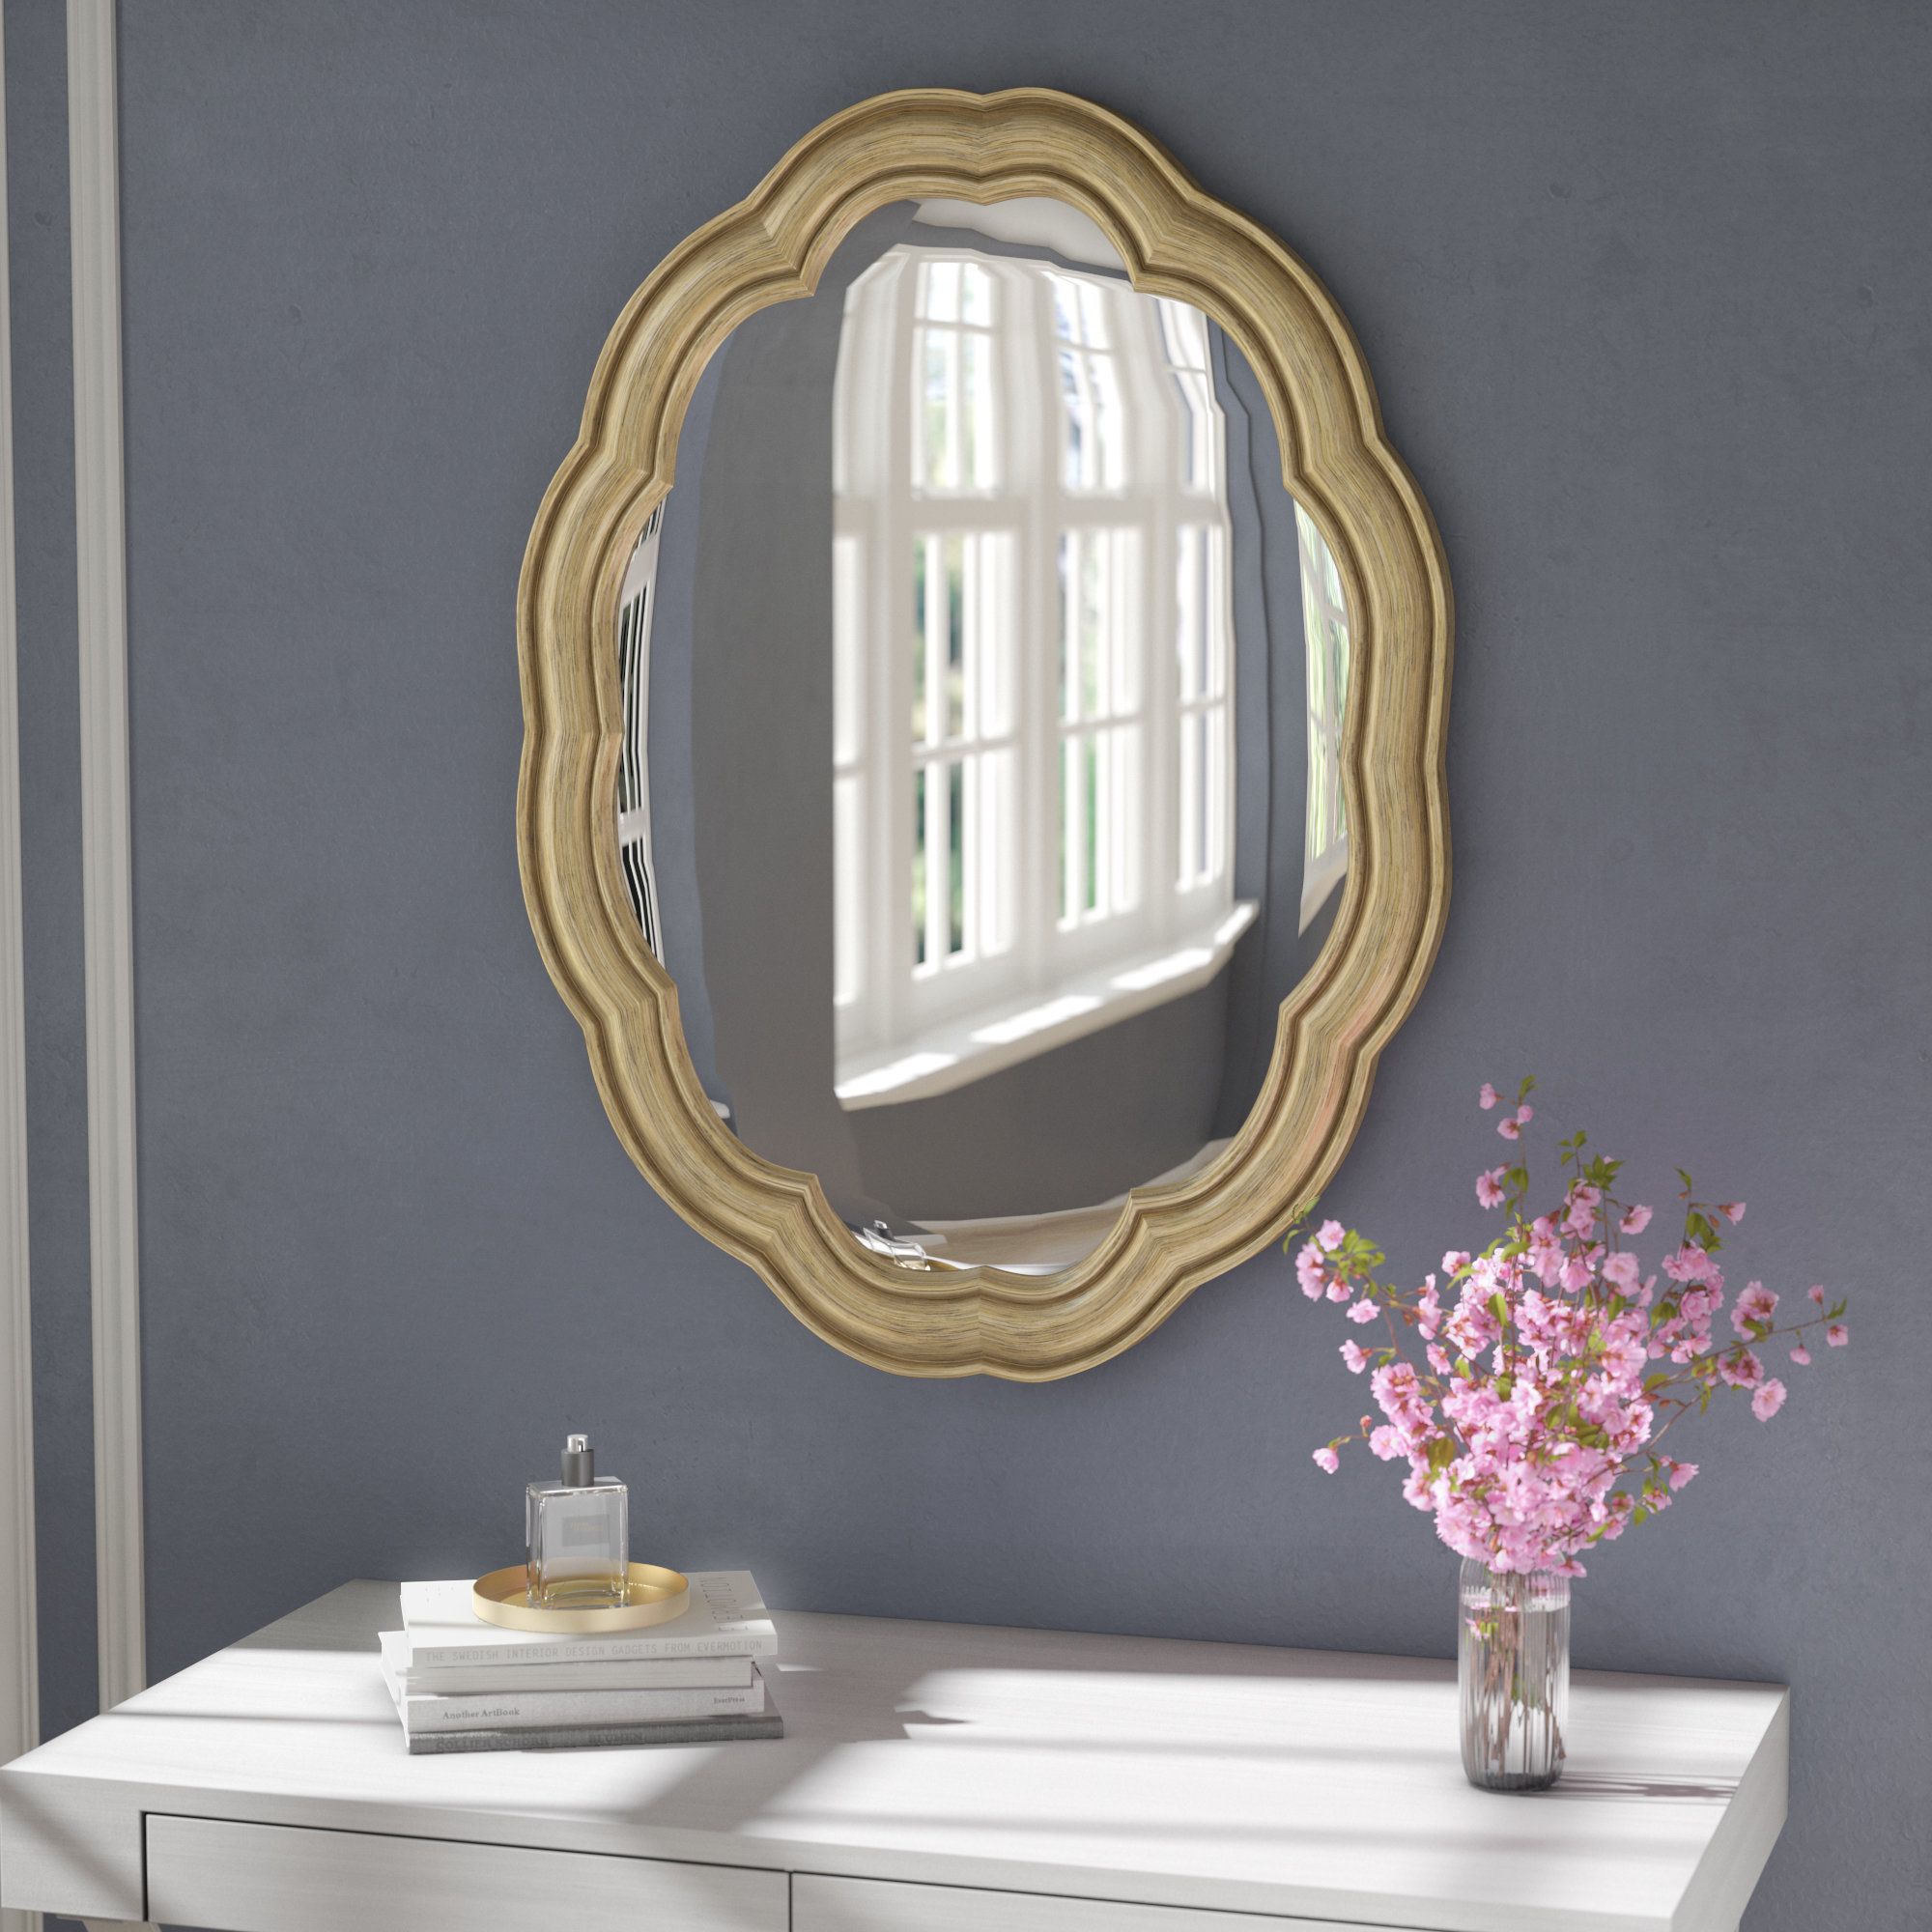 Glam Oval Accent Wall Mirror Within Broadmeadow Glam Accent Wall Mirrors (View 12 of 20)